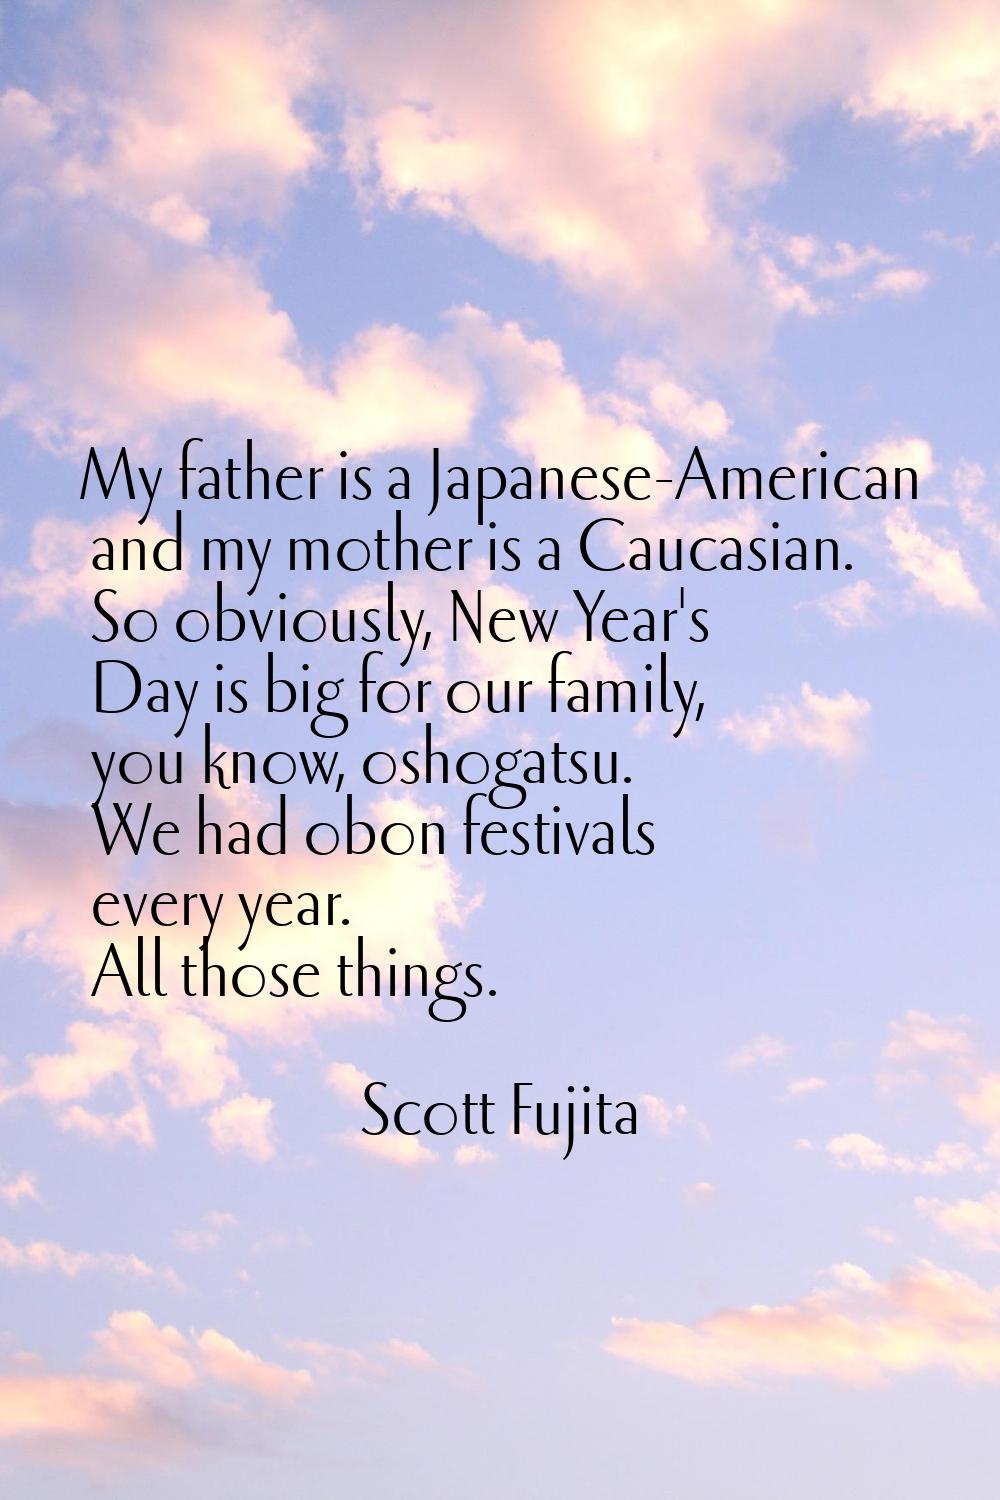 My father is a Japanese-American and my mother is a Caucasian. So obviously, New Year's Day is big 